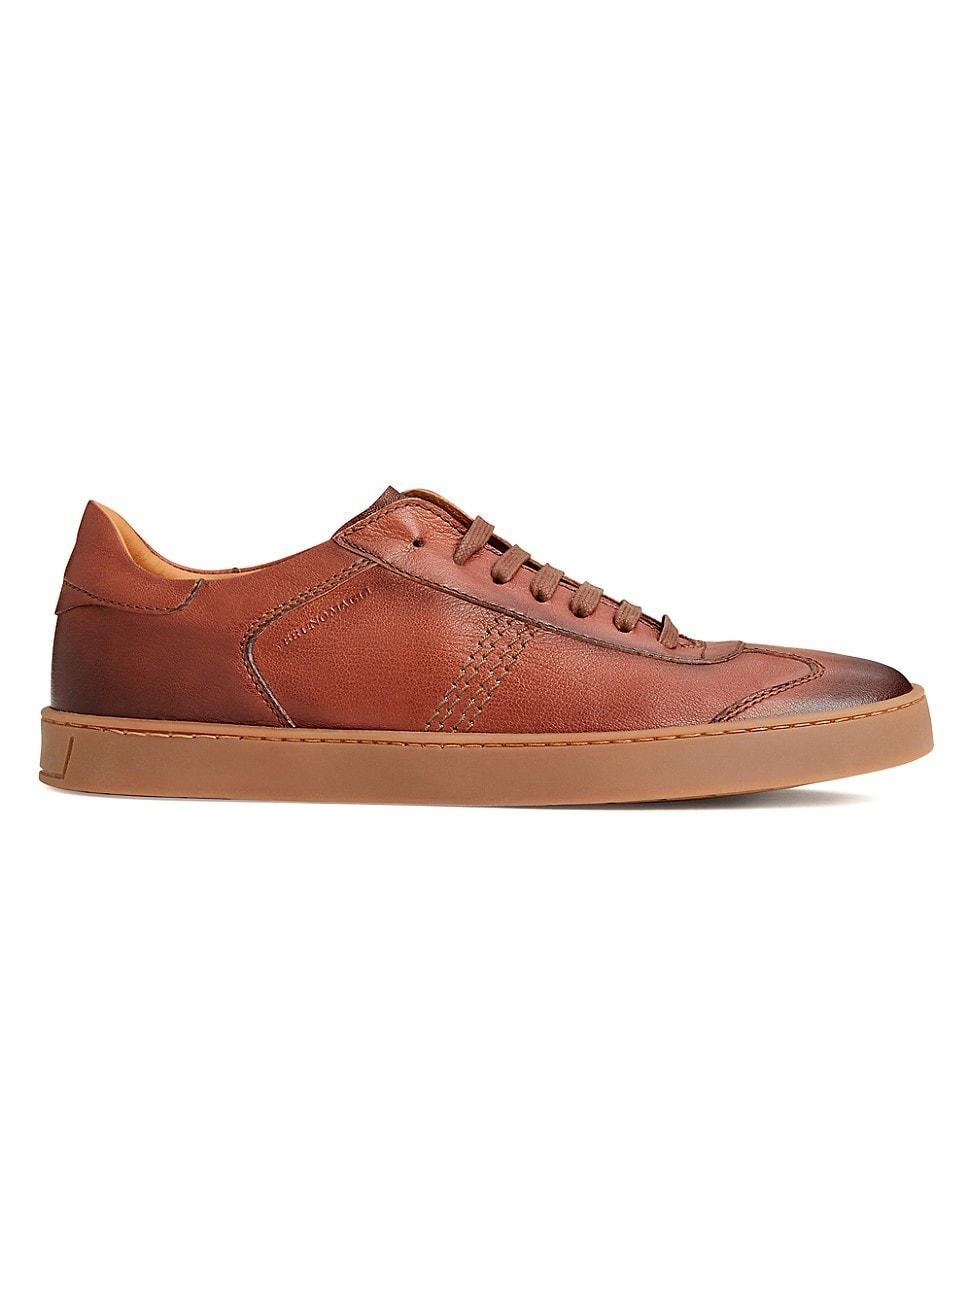 Mens Hartland Classic Leather Oxfords Product Image